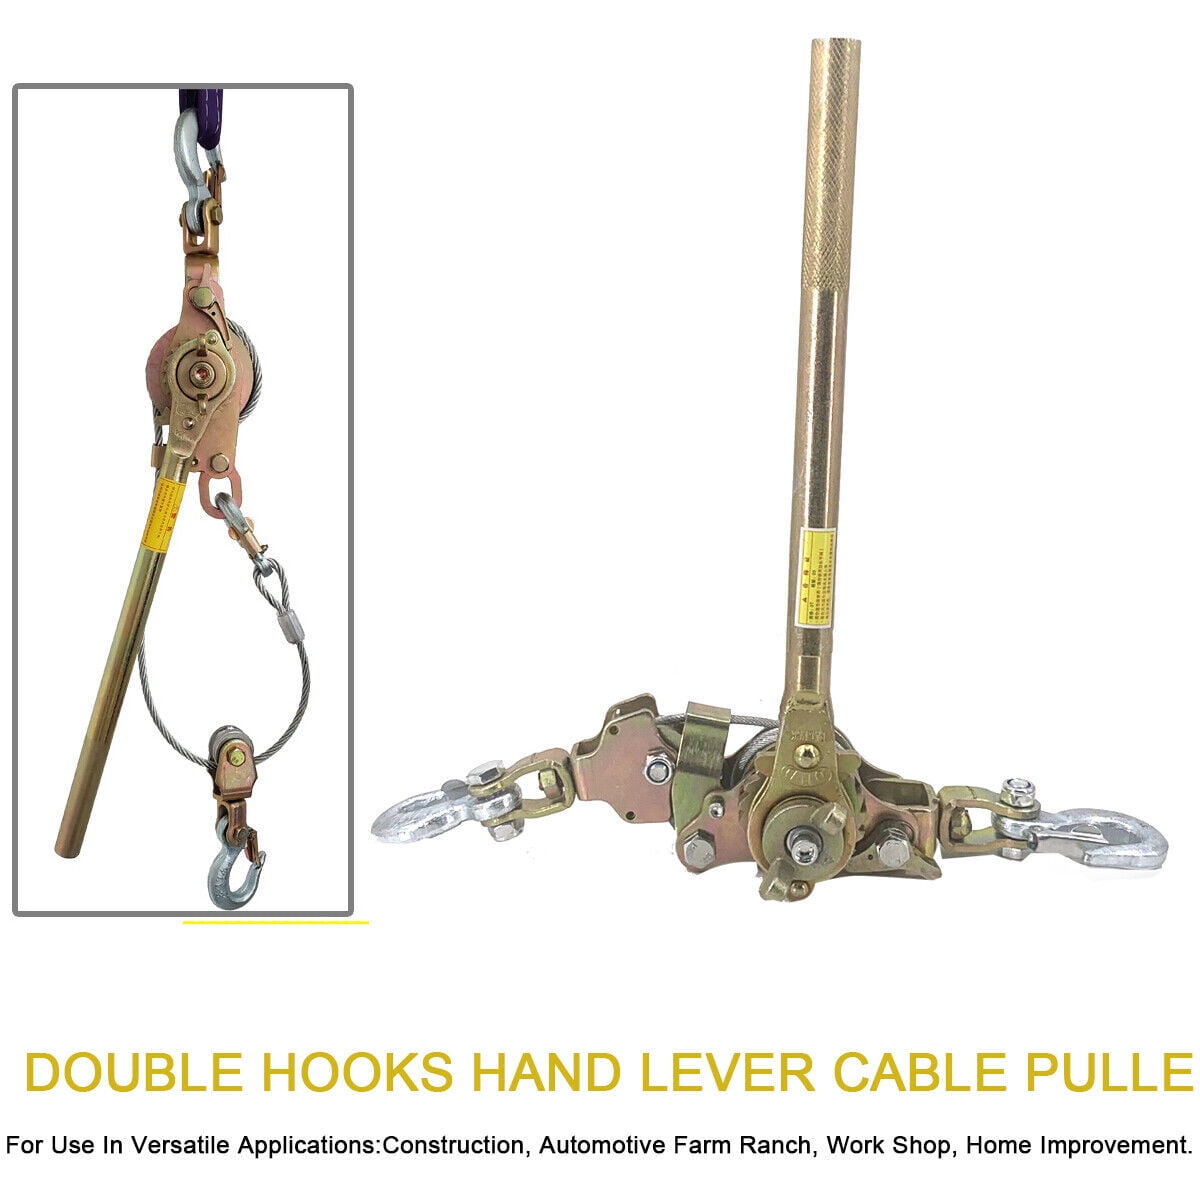 HD 2 Ton Ratcheting Lever Hoist Hand Puller Come Along 2 Hooks Cable Dual Gear 